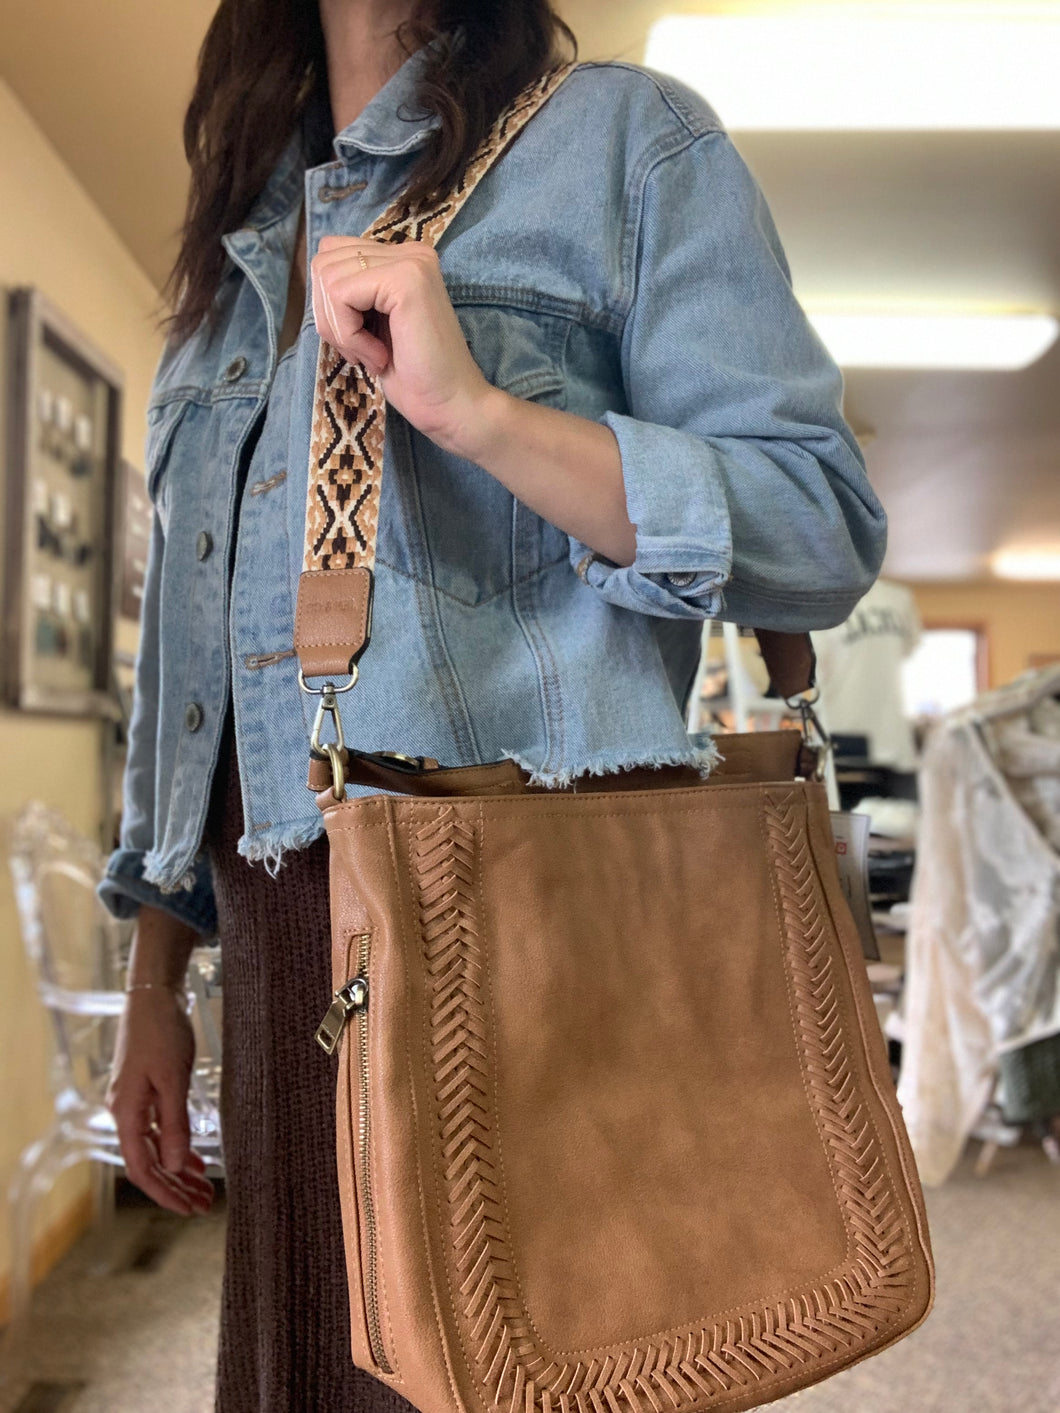 latte stitched hobo bag with guitar strap